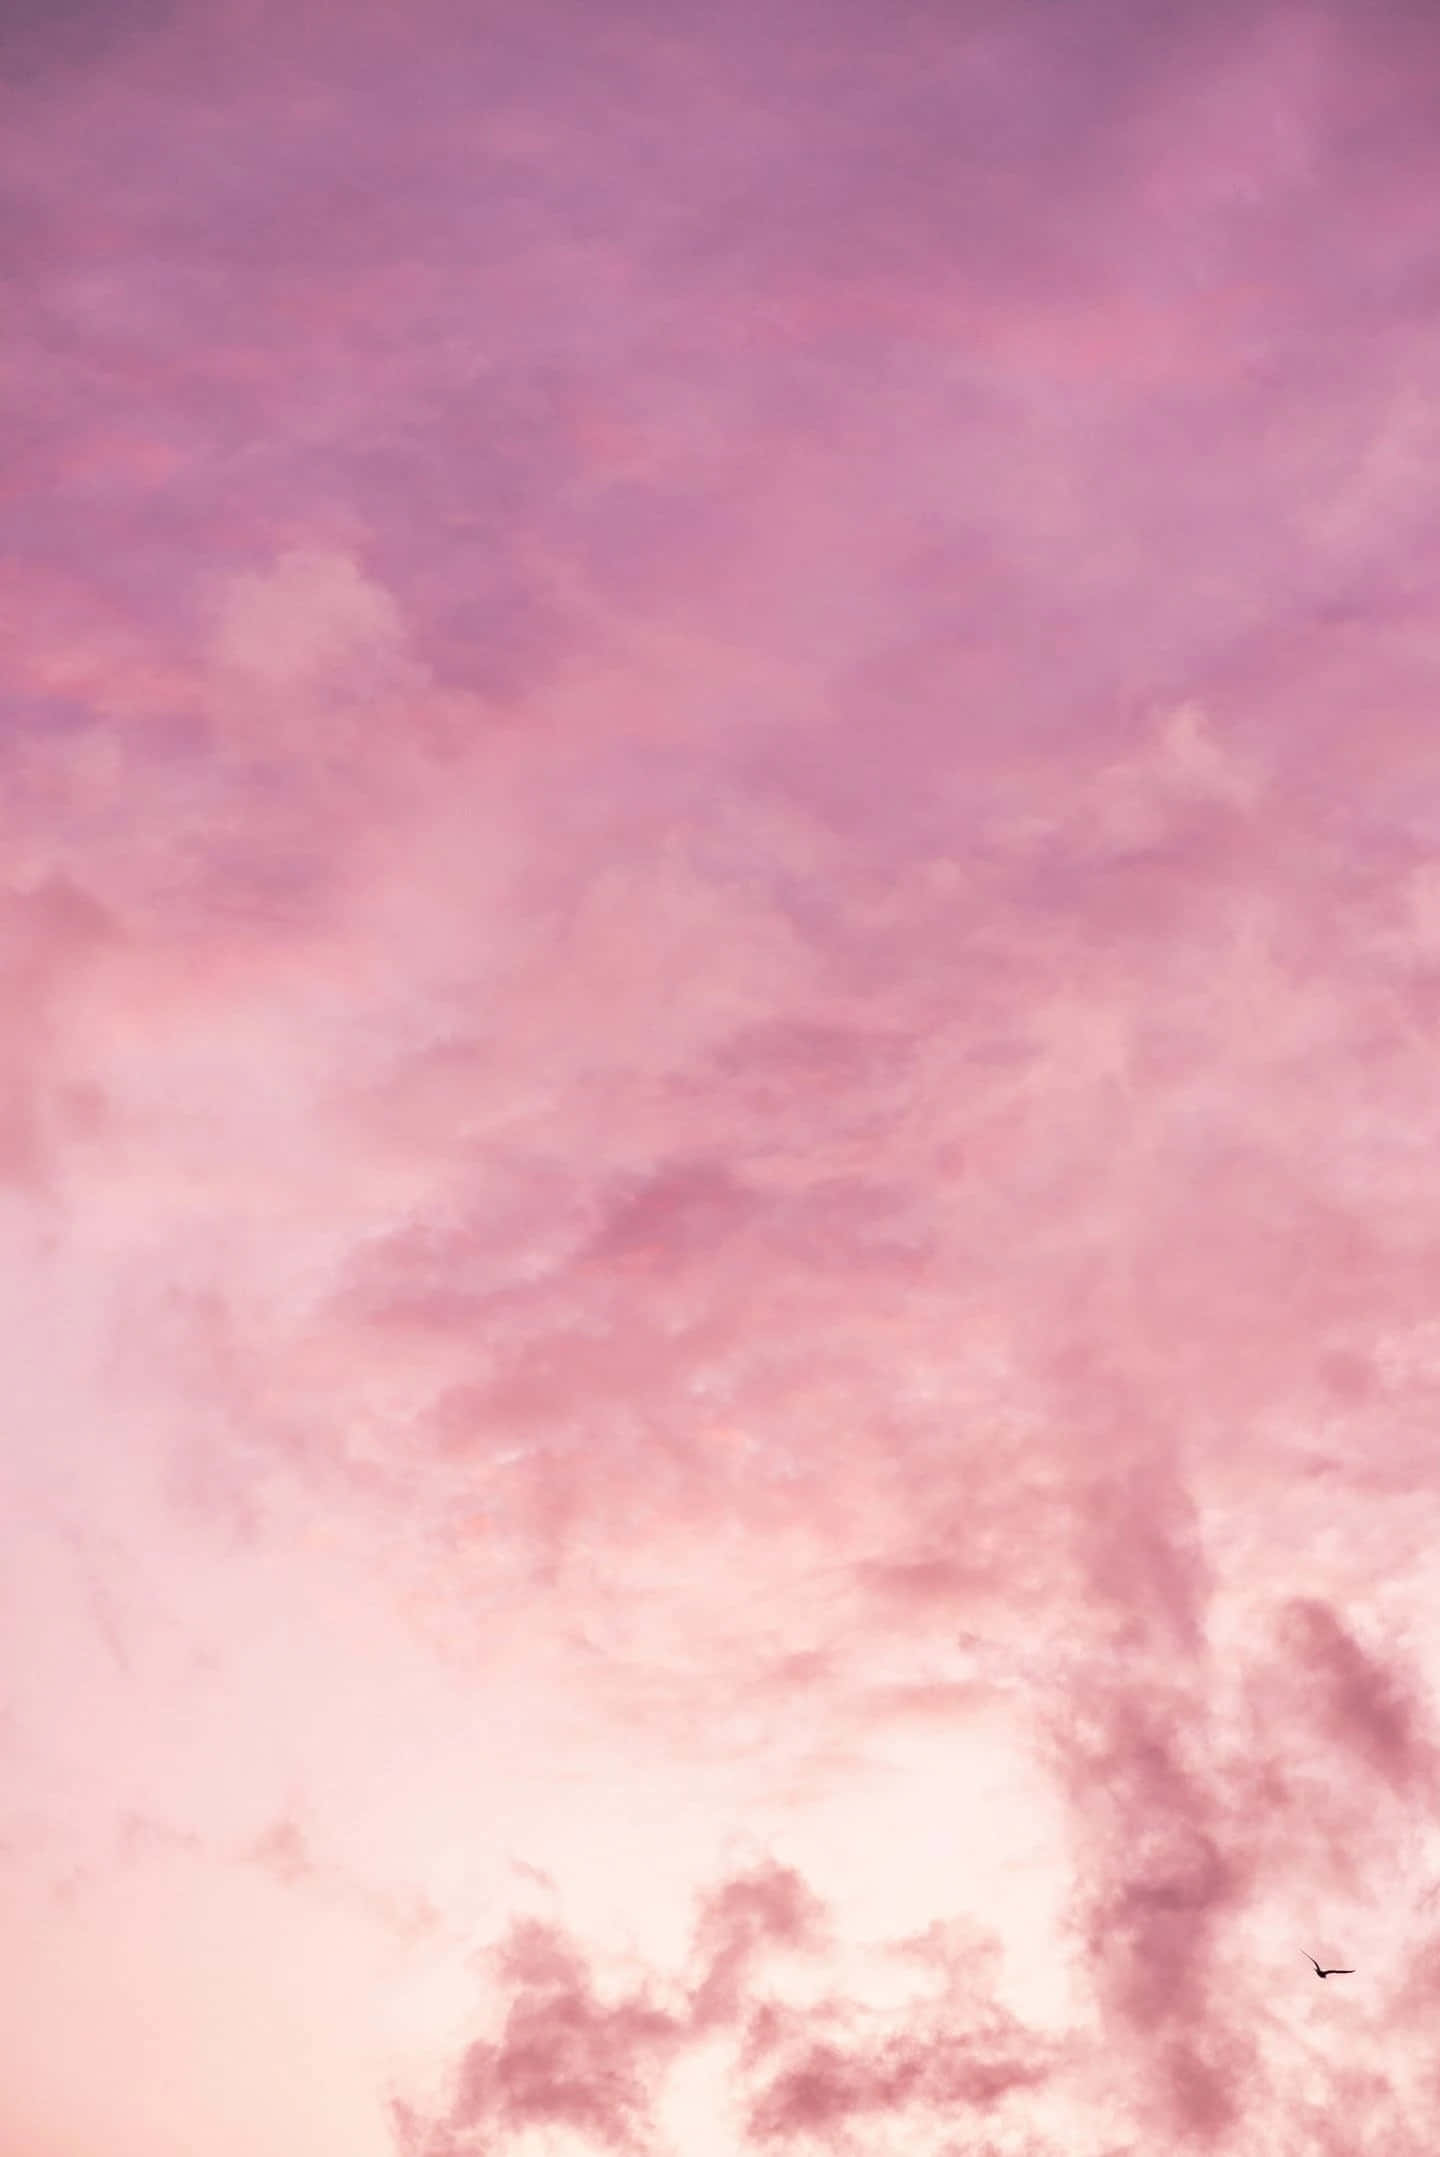 Add some personal flair to your phone with this stylish Pink Phone background.